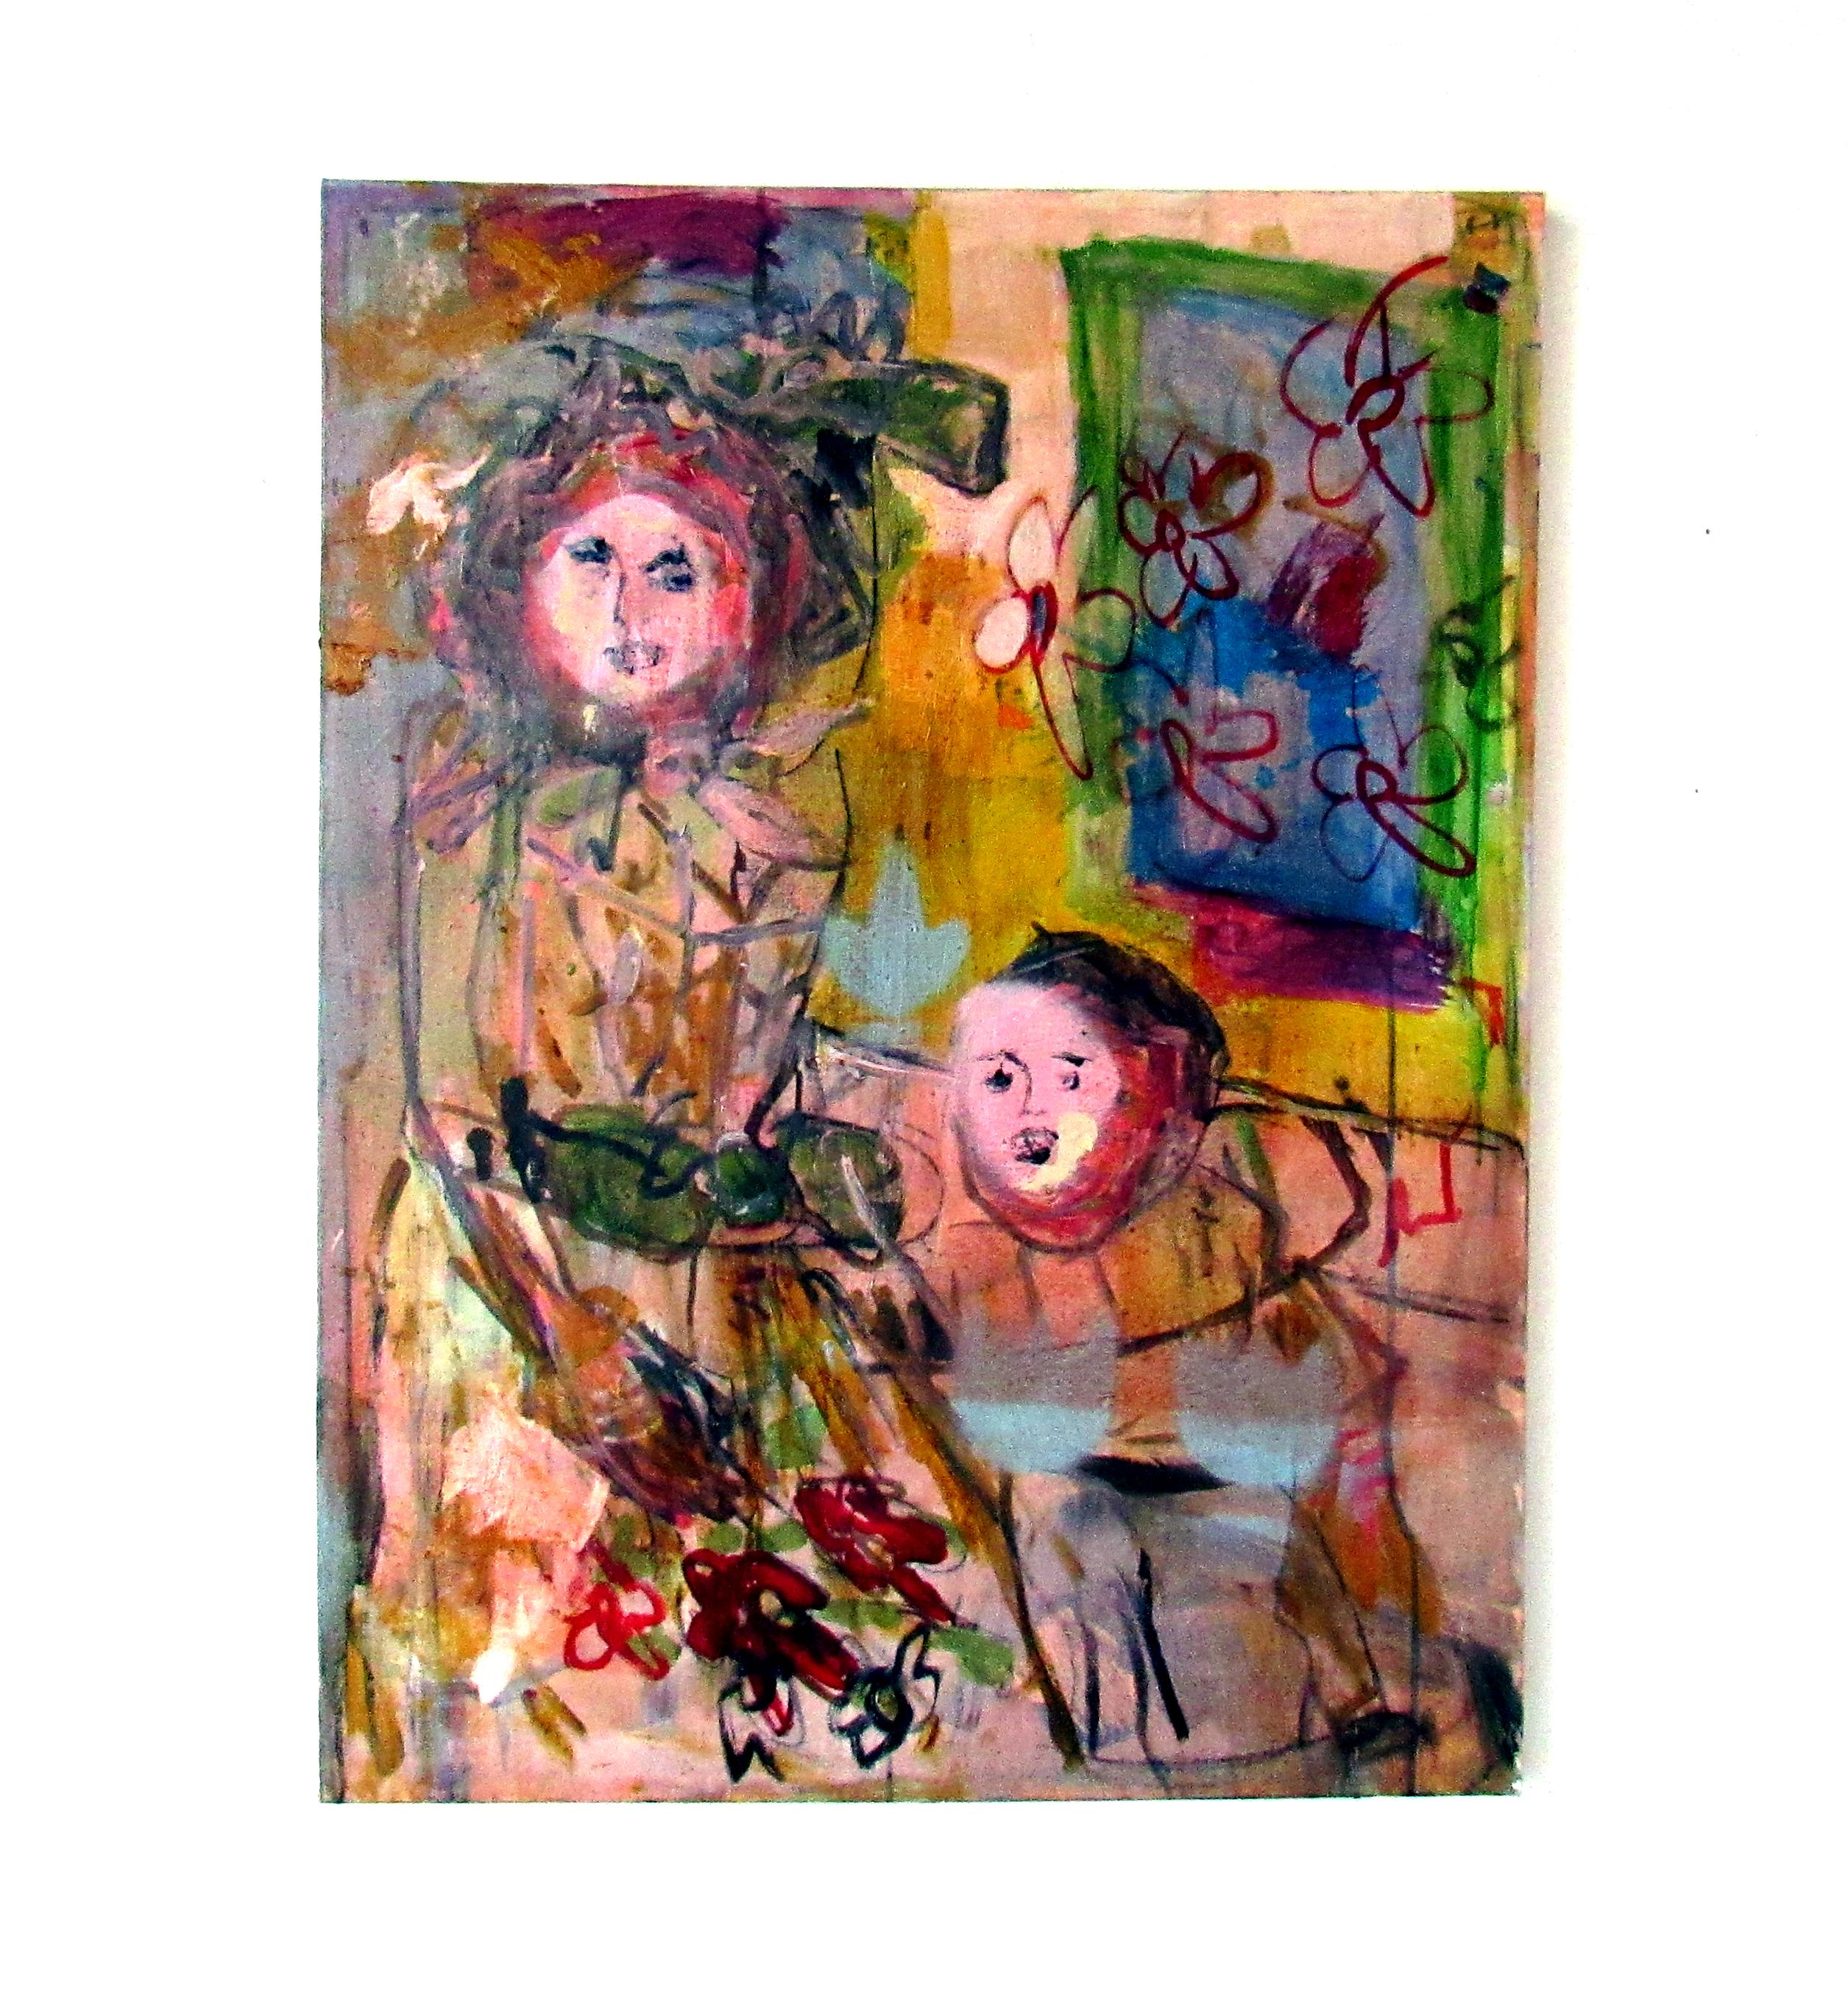 Rosemarie & Young Jim, bright colors abstracted portrait interior flowers - Painting by C. Dimitri